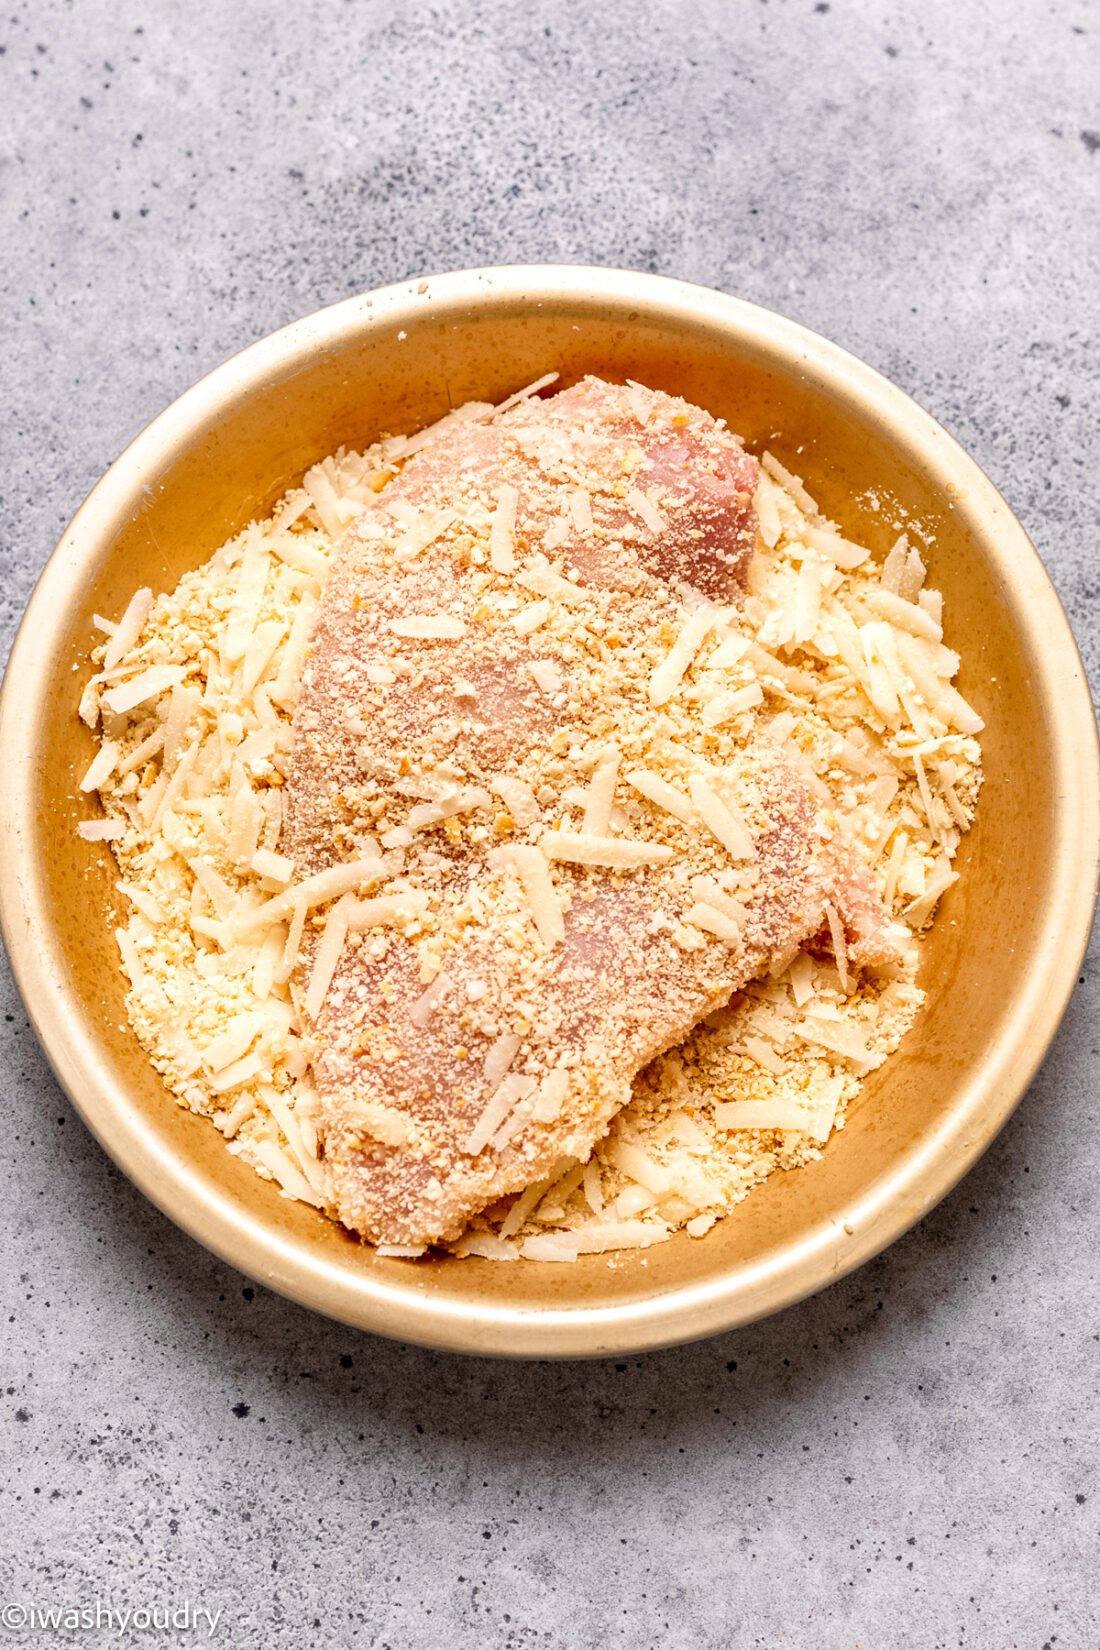 Raw chicken breast coated in parmesan cheese and cracker crumbs in a bowl. 